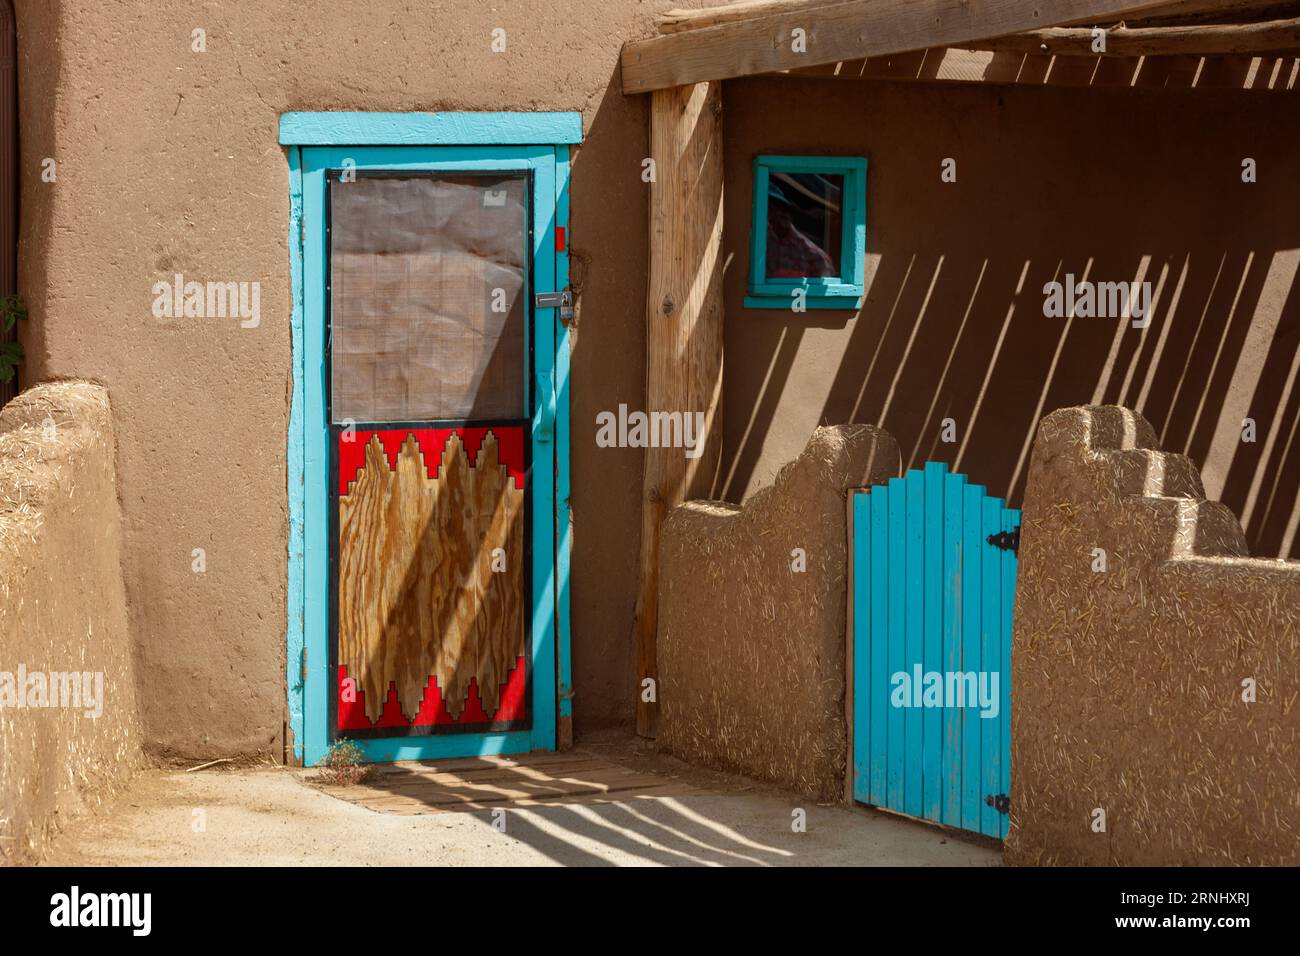 Decarative door at the Taos Pueblo built by the Tiwa tribe and is one of the oldest continuously inhabited places in the US - New Mexico Stock Photo